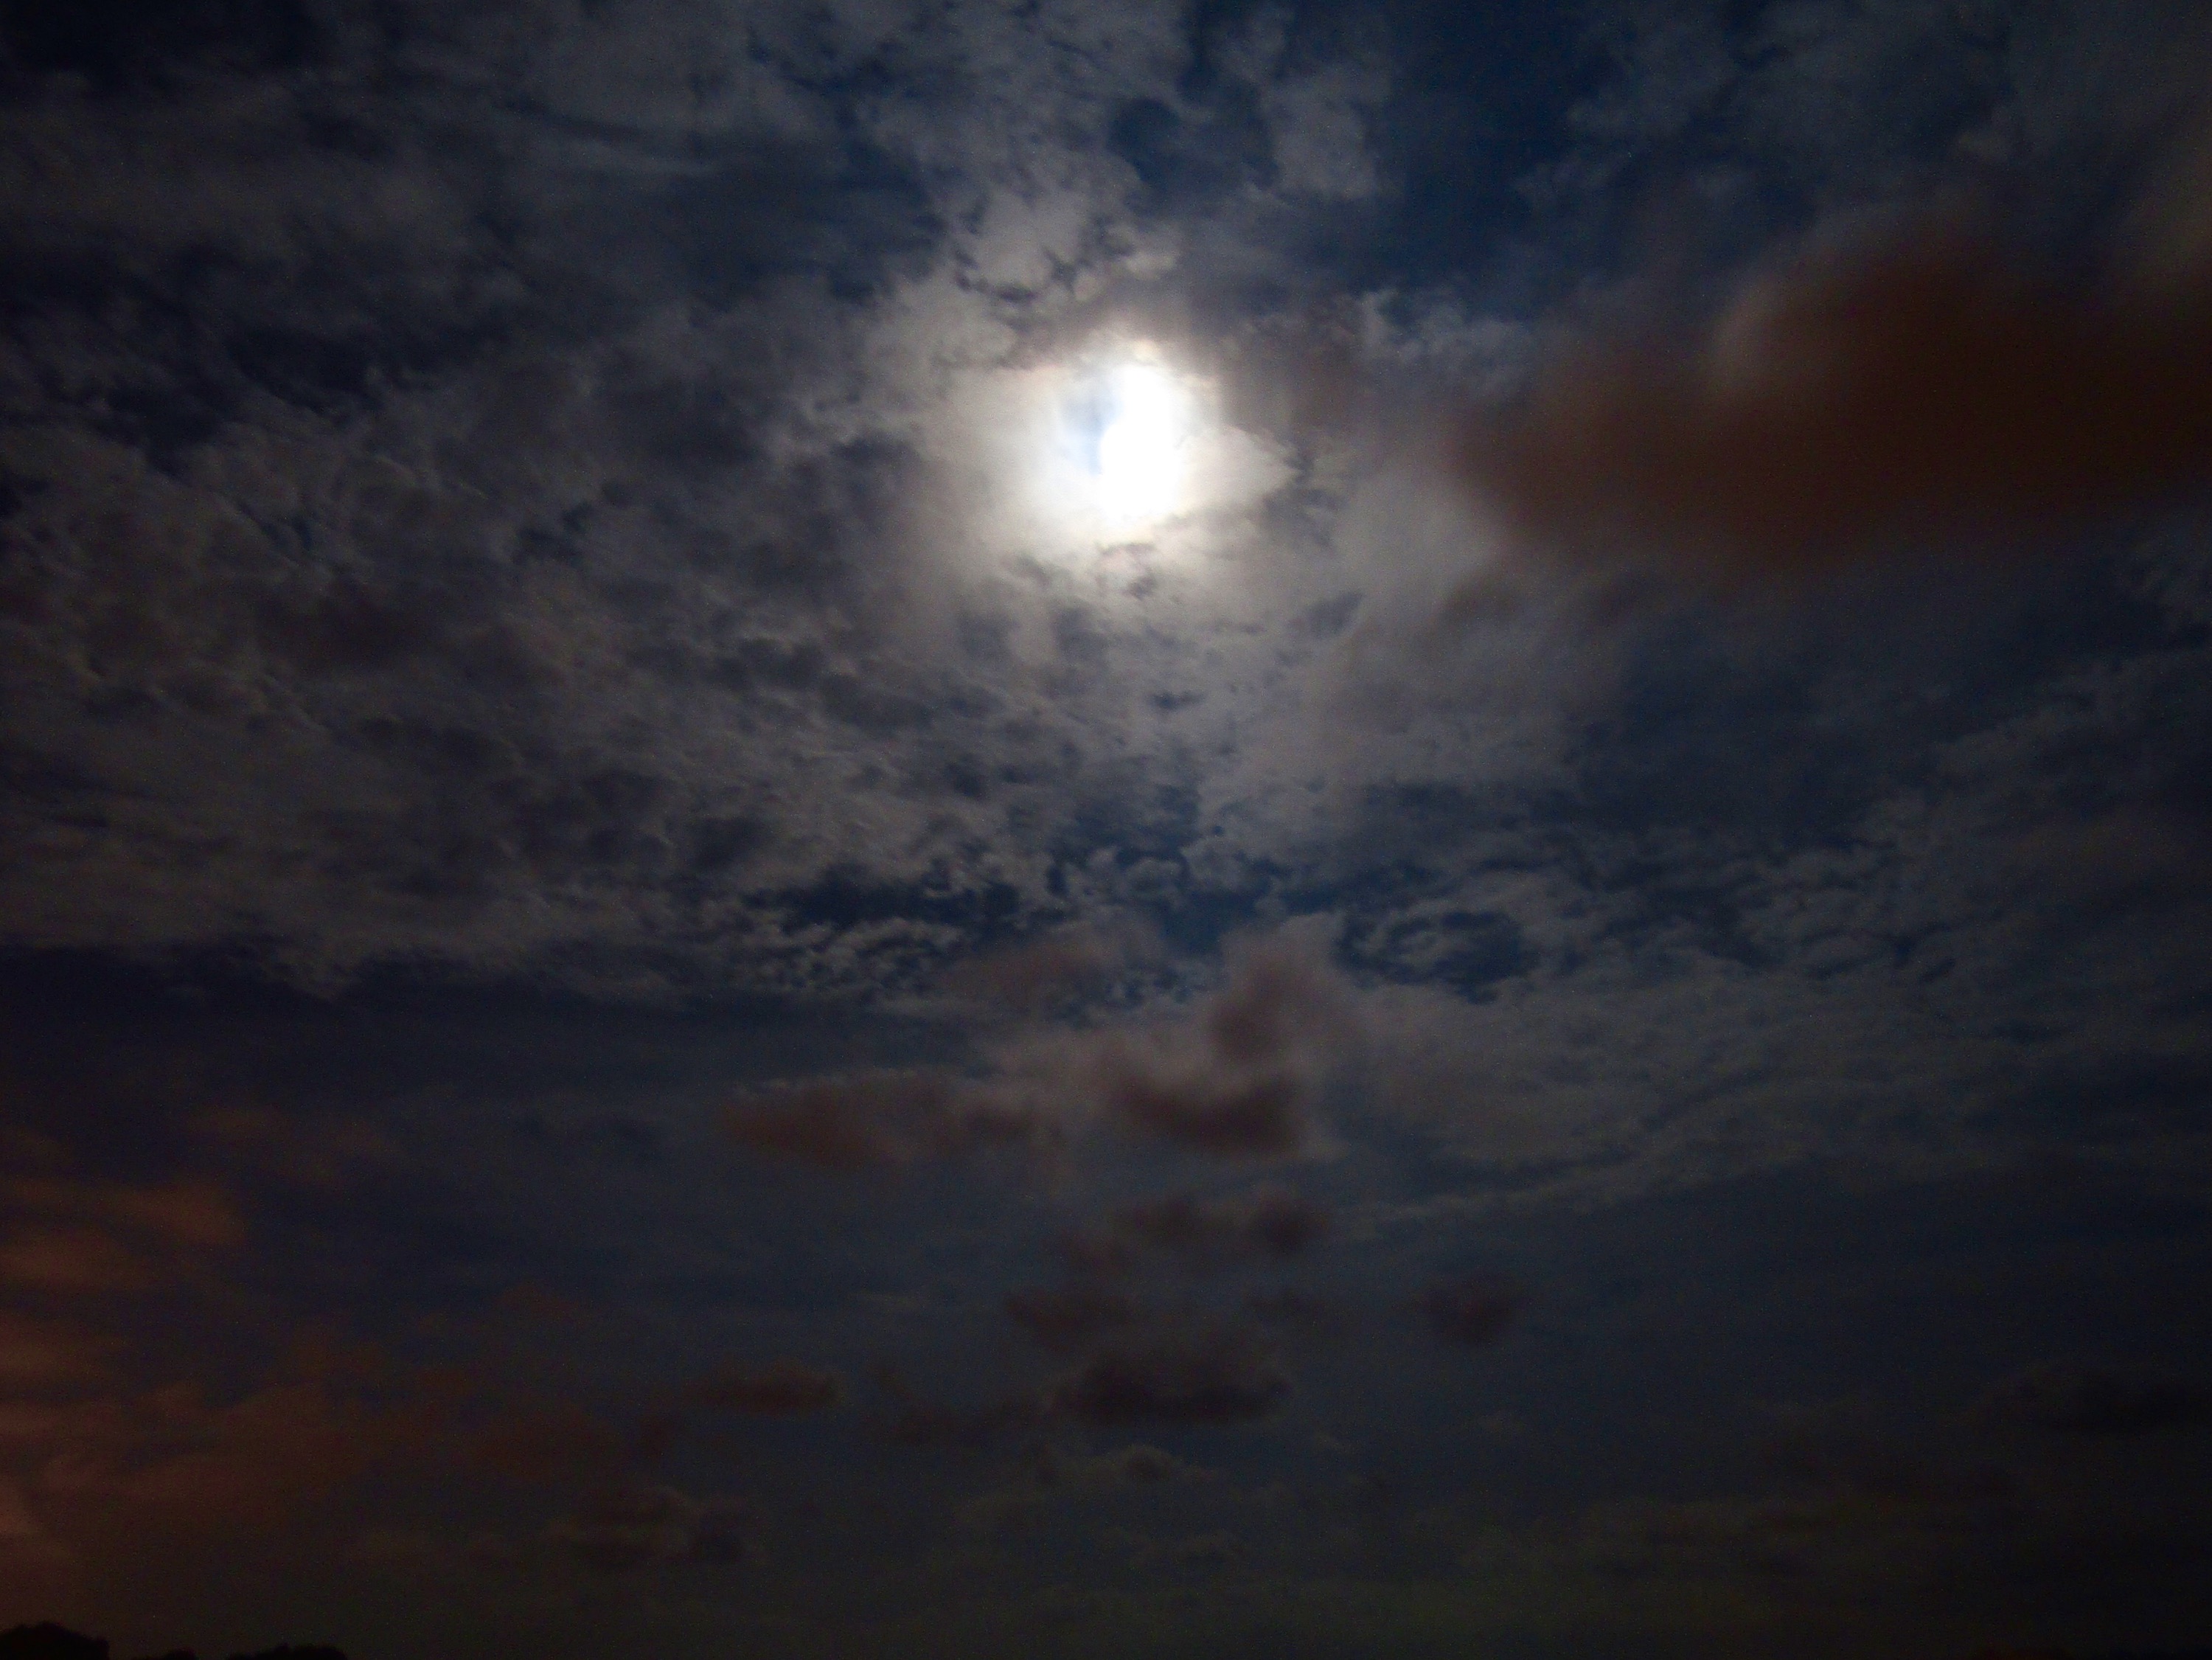 Fiddling with the nighttime settings on our new camera, I managed to capture the moon over the gulf on a cloudy evening.  